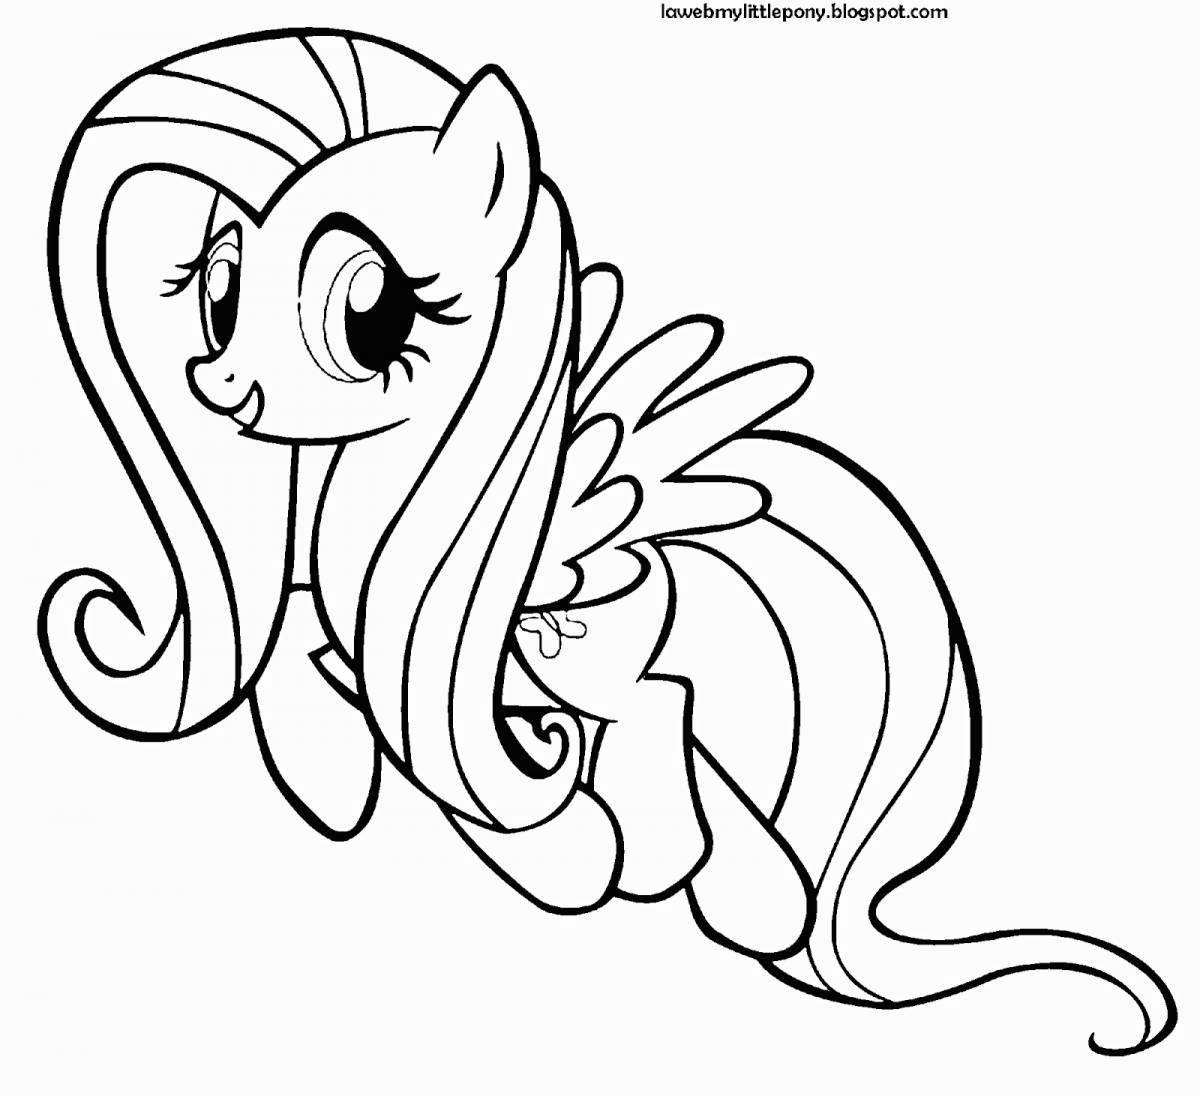 Coloring exalted fluttershy pony my little